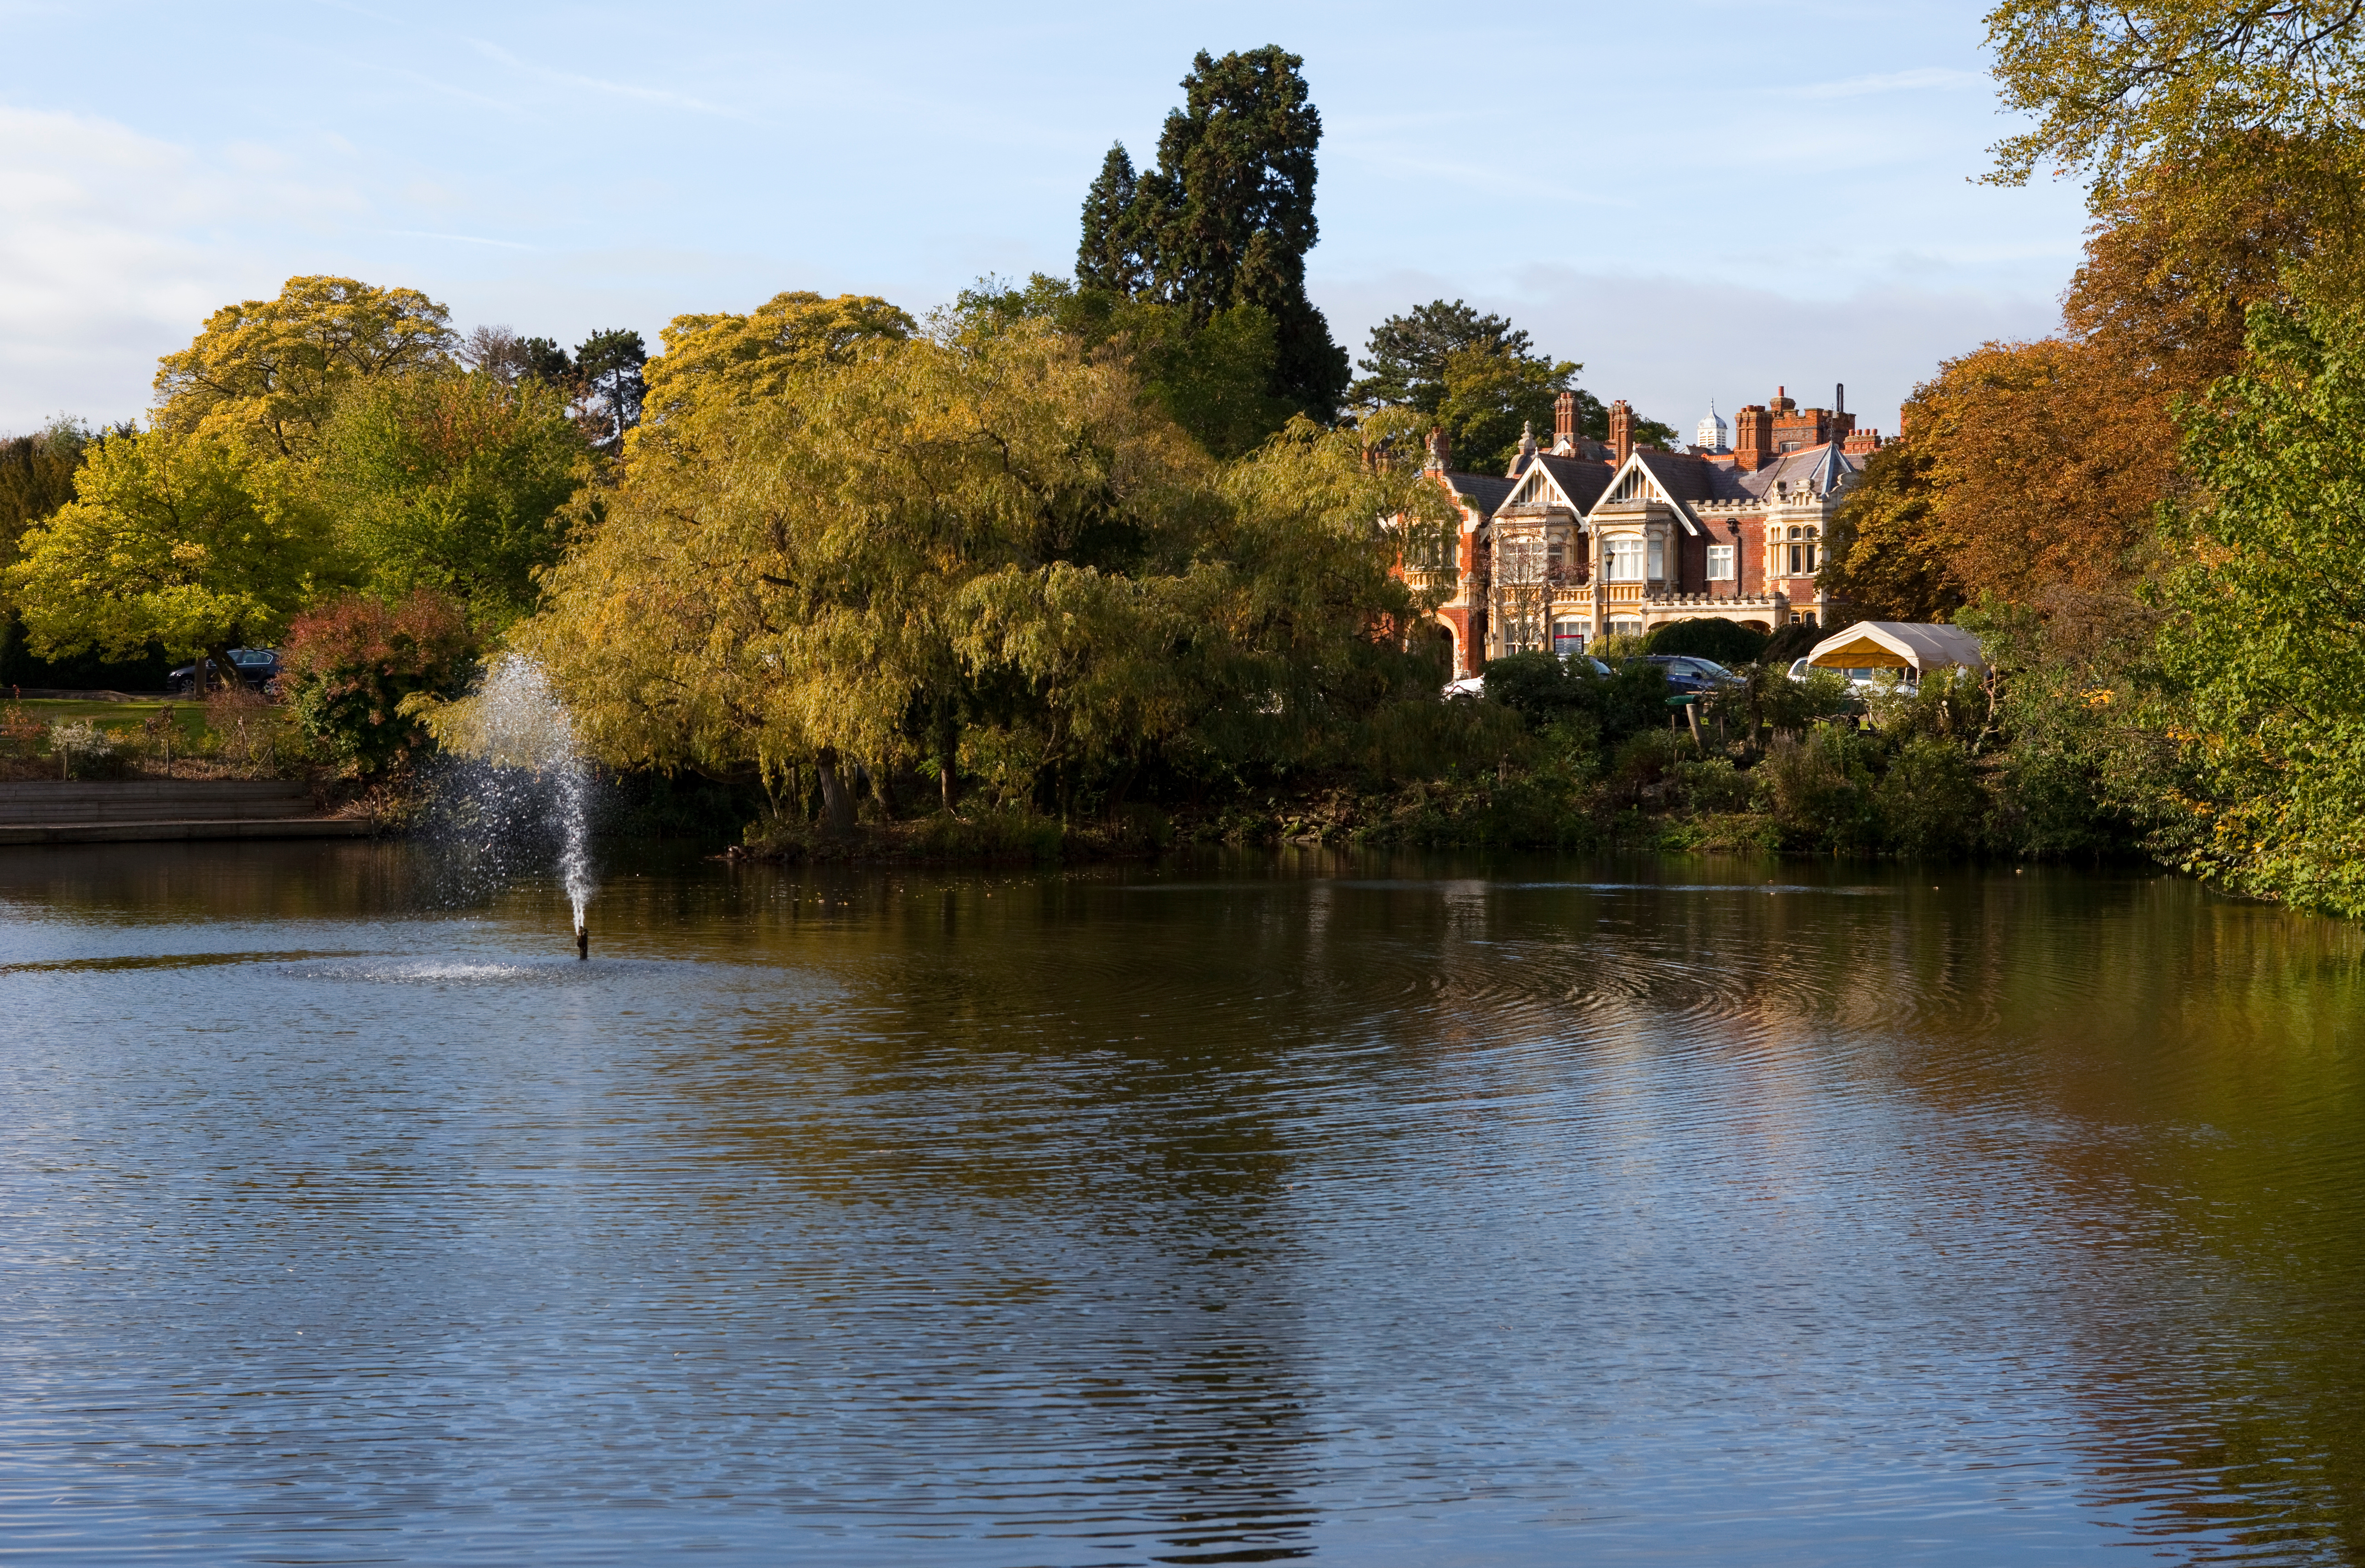 Image shows a large lake with a stately home to the rear